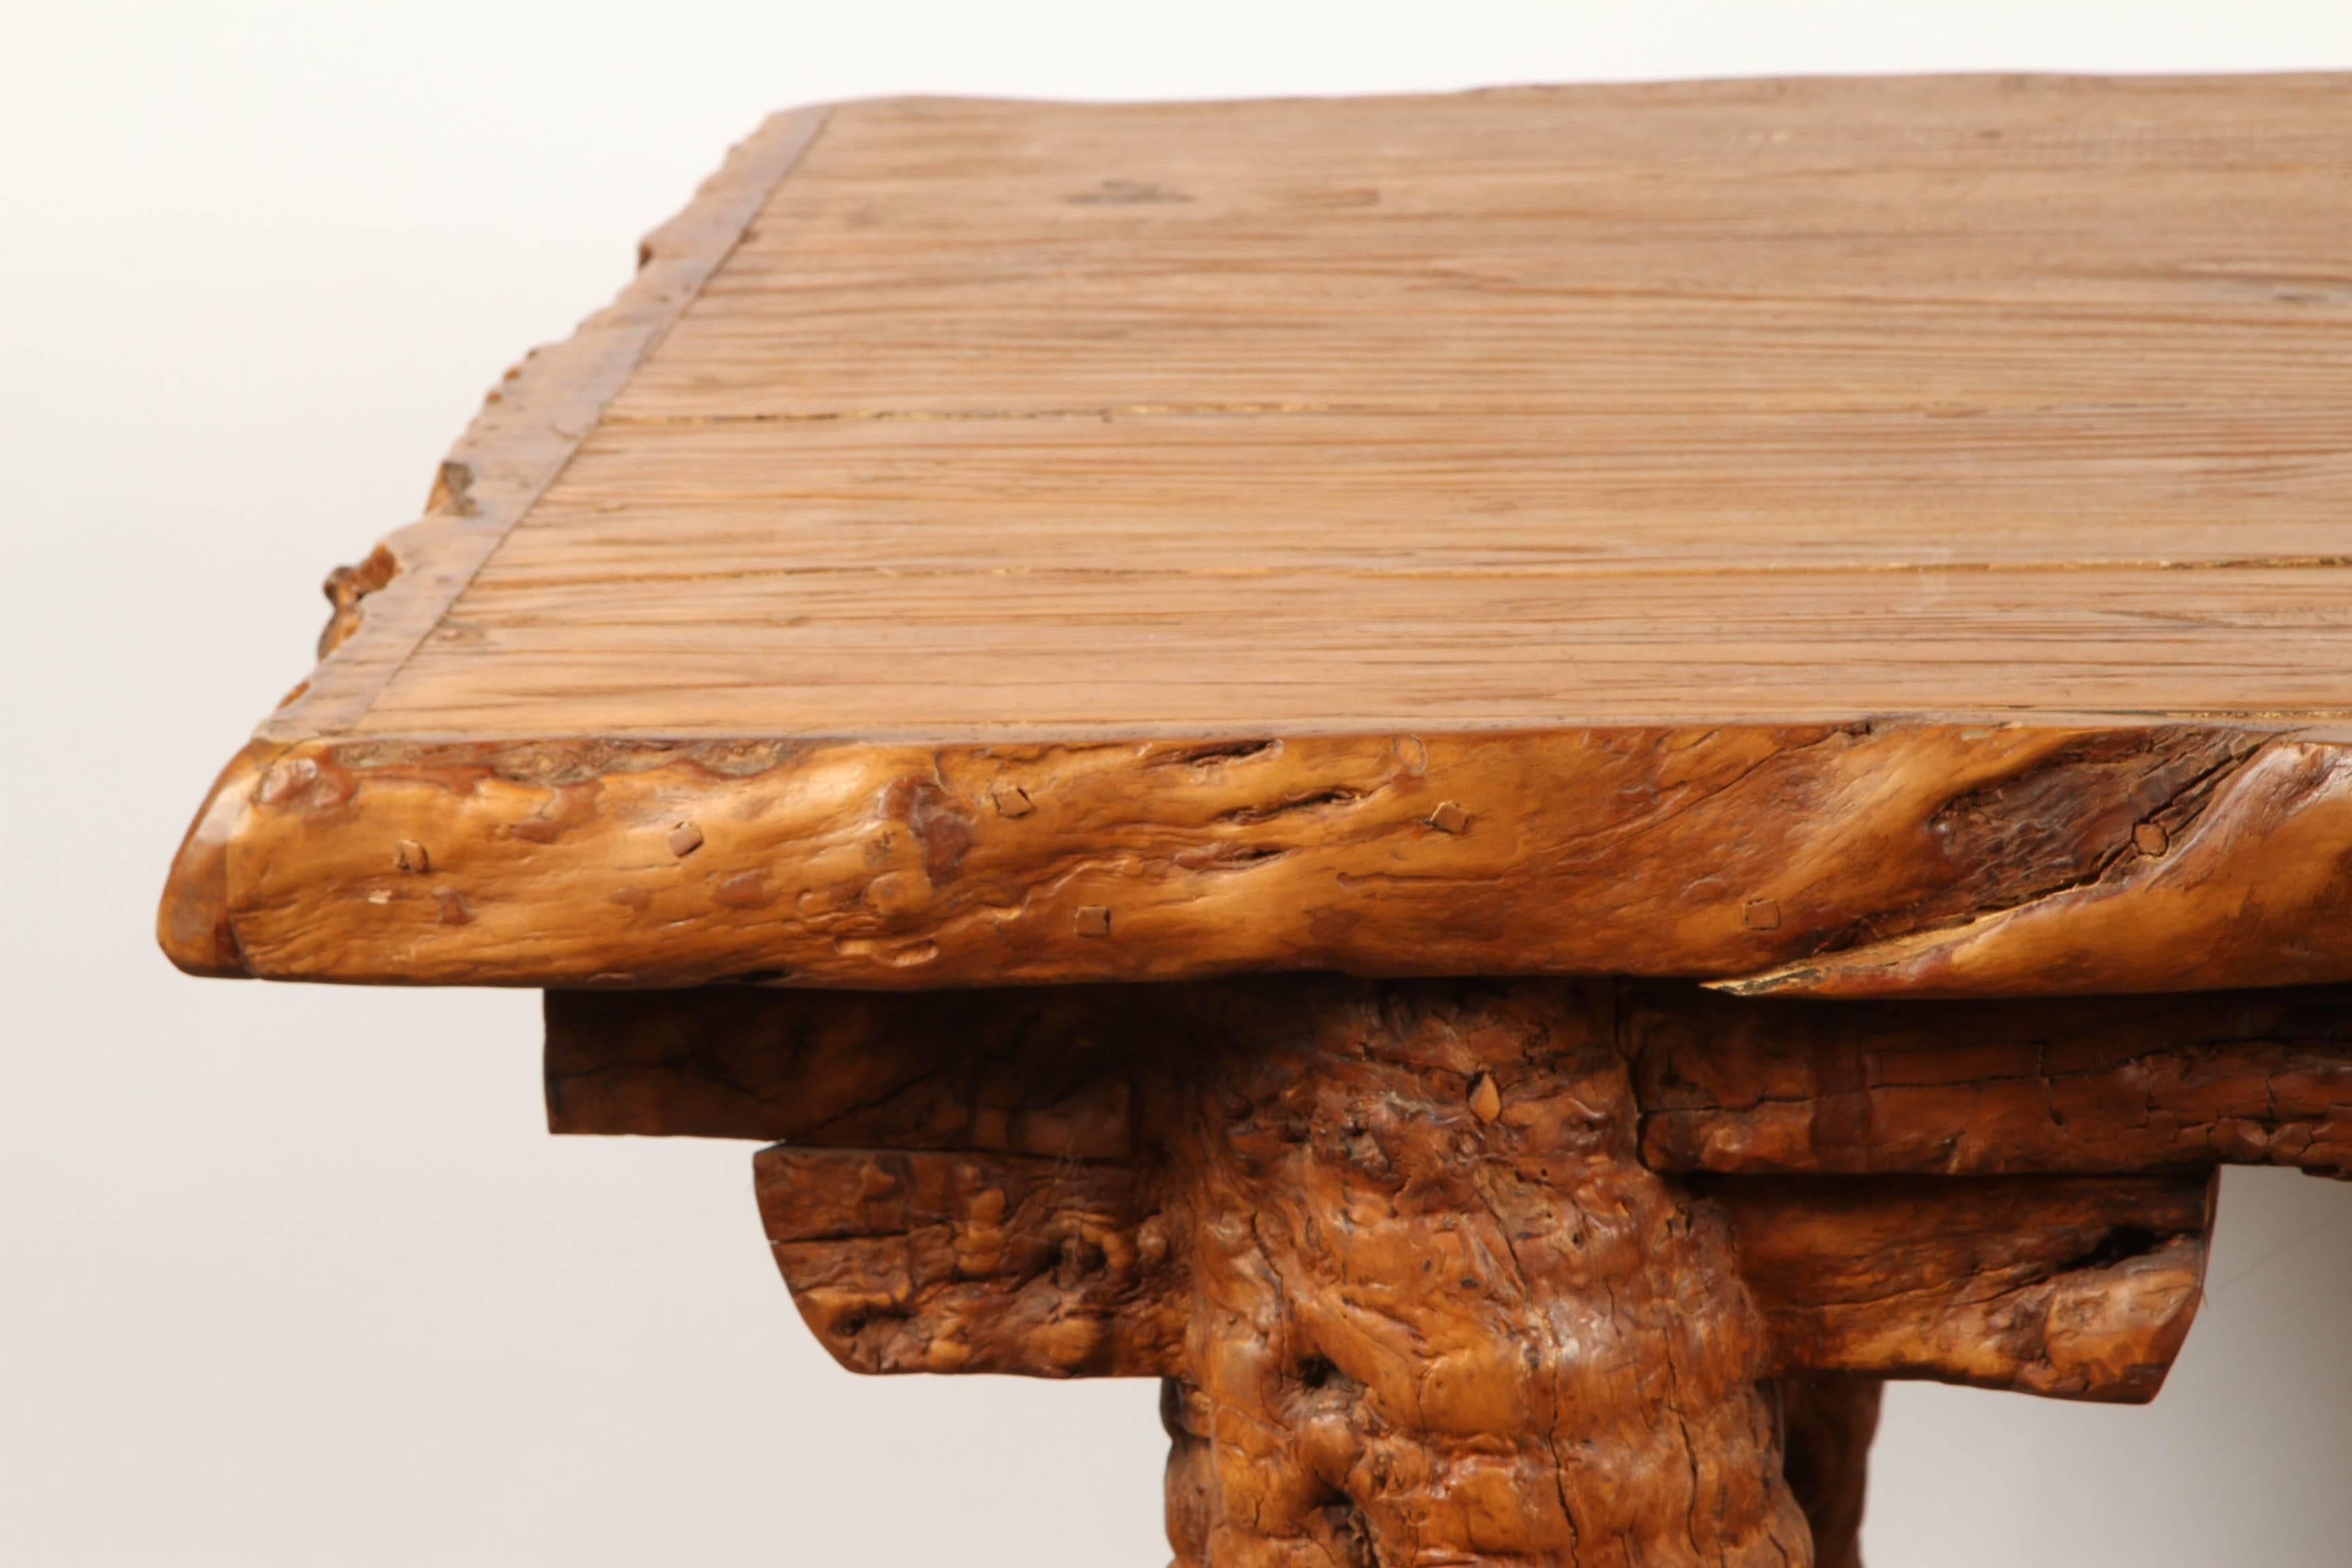 19th century Chinese rustic root table, made from natural tree timbers. Sturdy and appealing country styling is obvious in this table from the Qing period, circa 1900. 